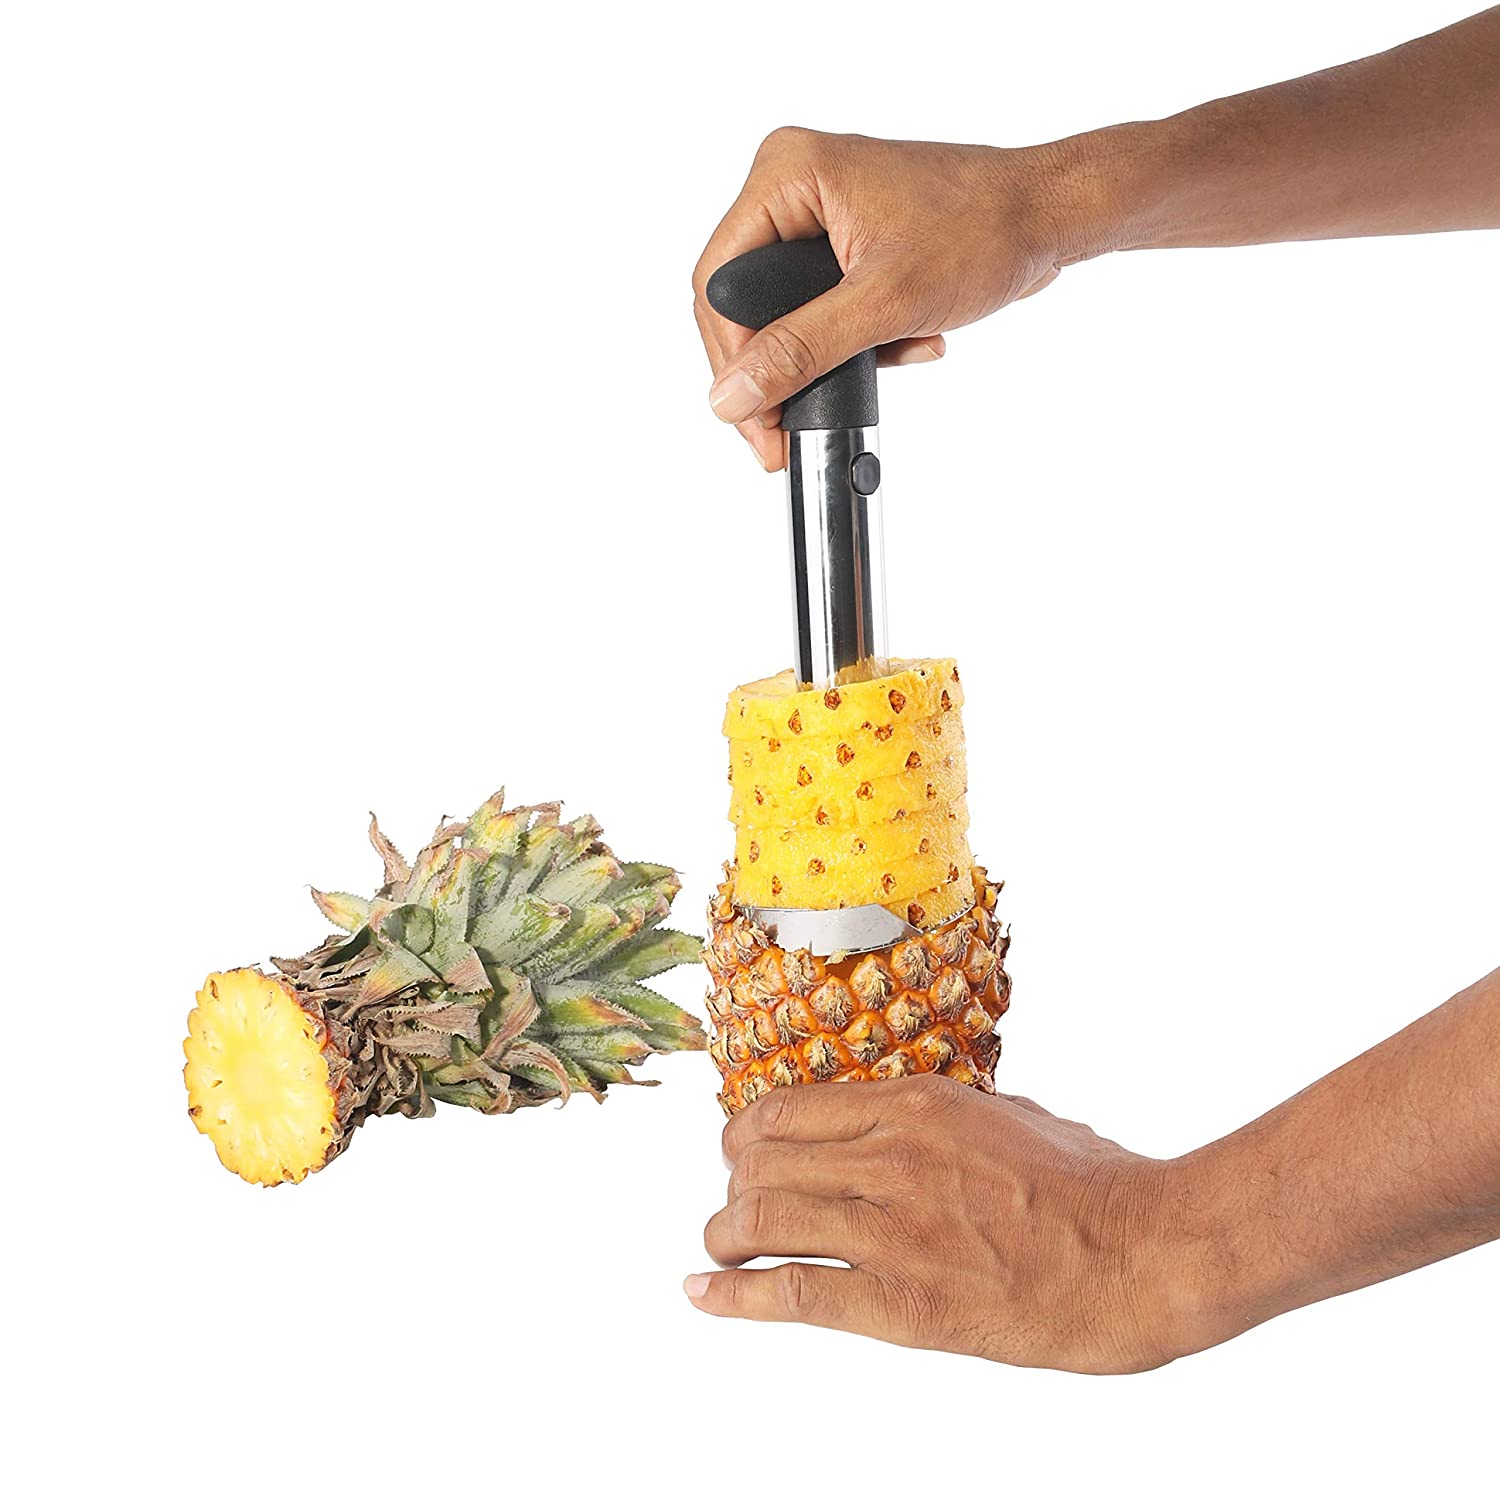 Classy Touch Pineapple Corer with Slicer | 1 Pc